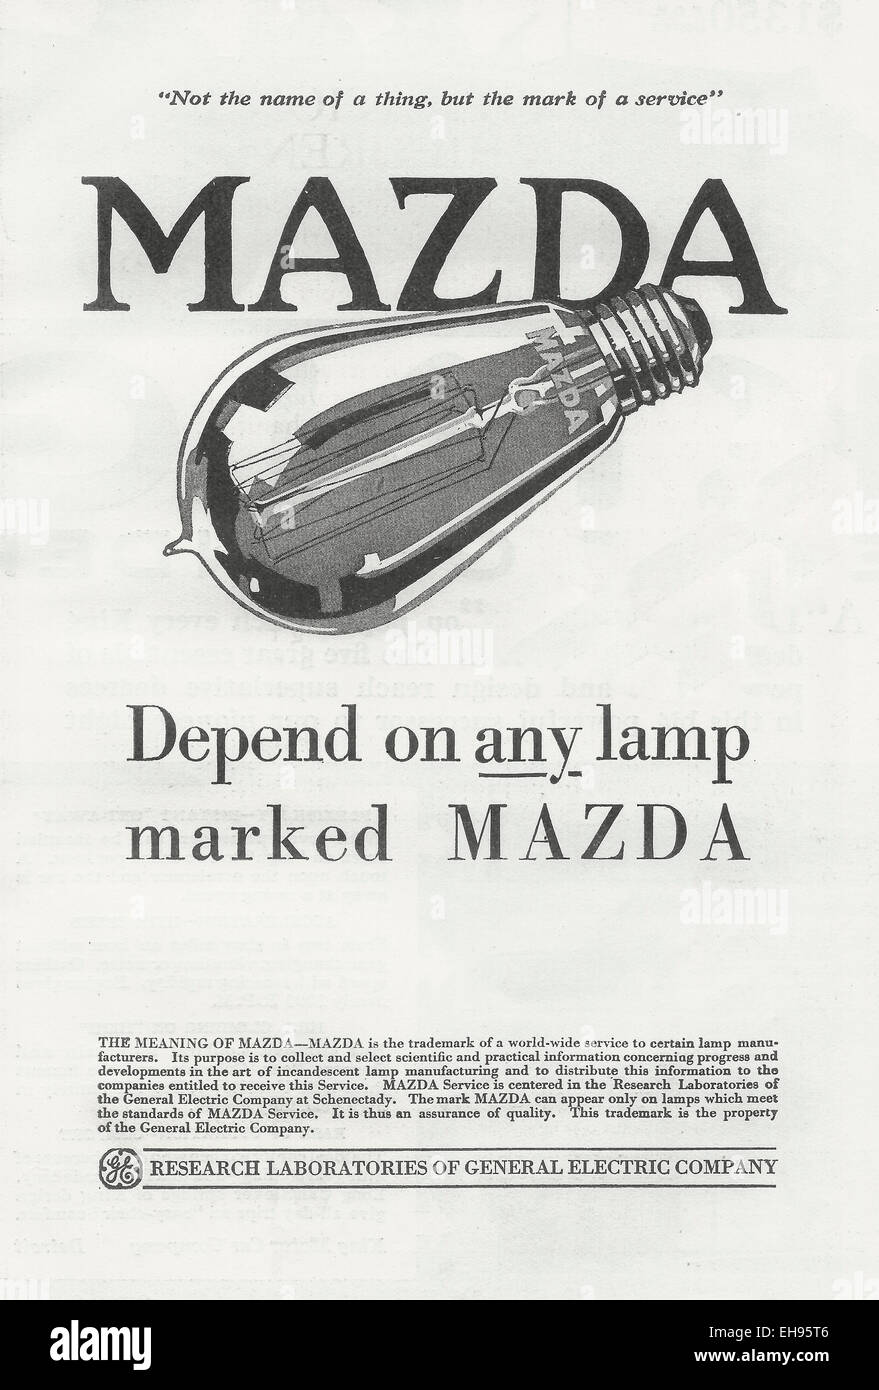 Mazda - Depend on any lamp marked Mazda - General Electric advertisement 1916 Stock Photo